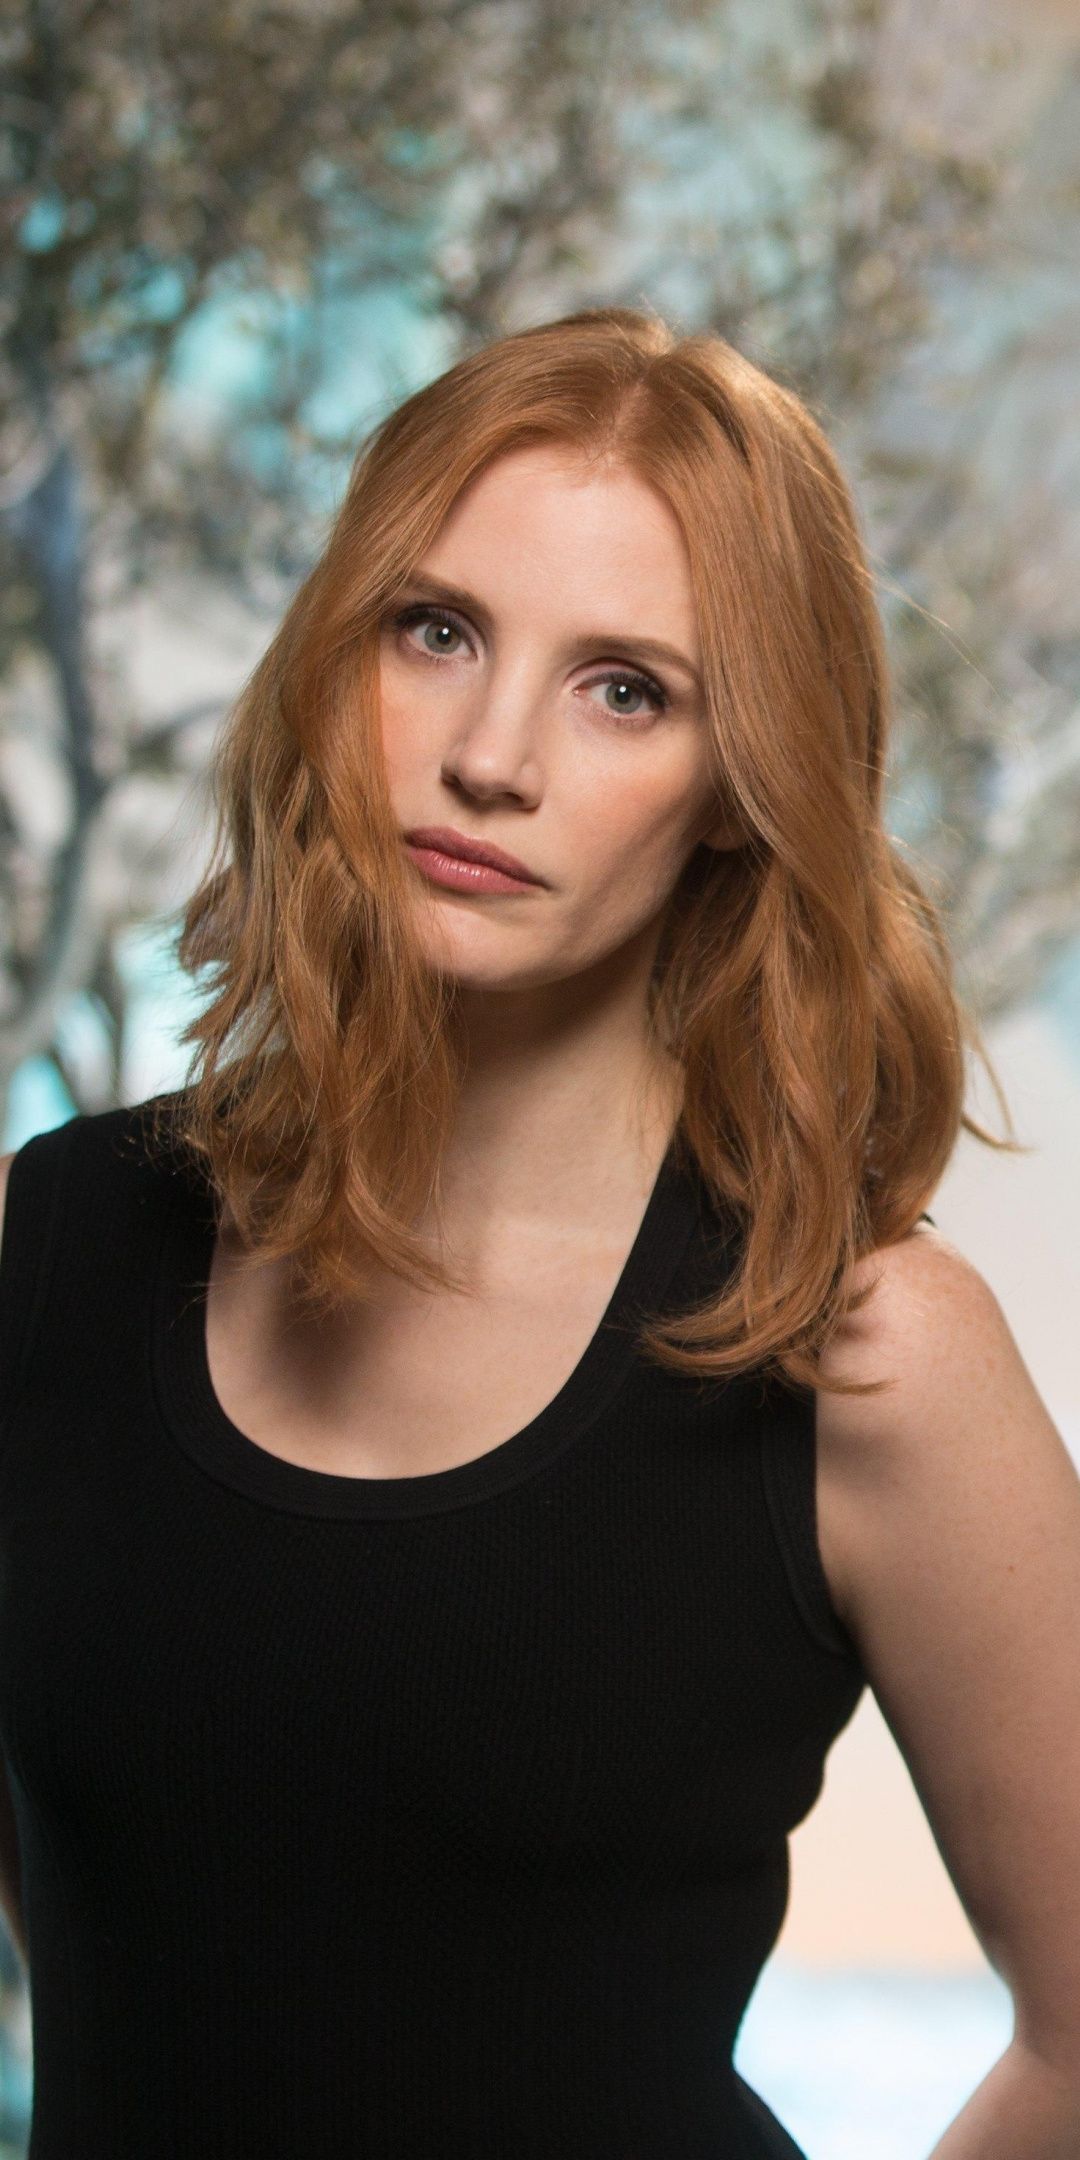 Jessica Chastain Redhead Wallpapers